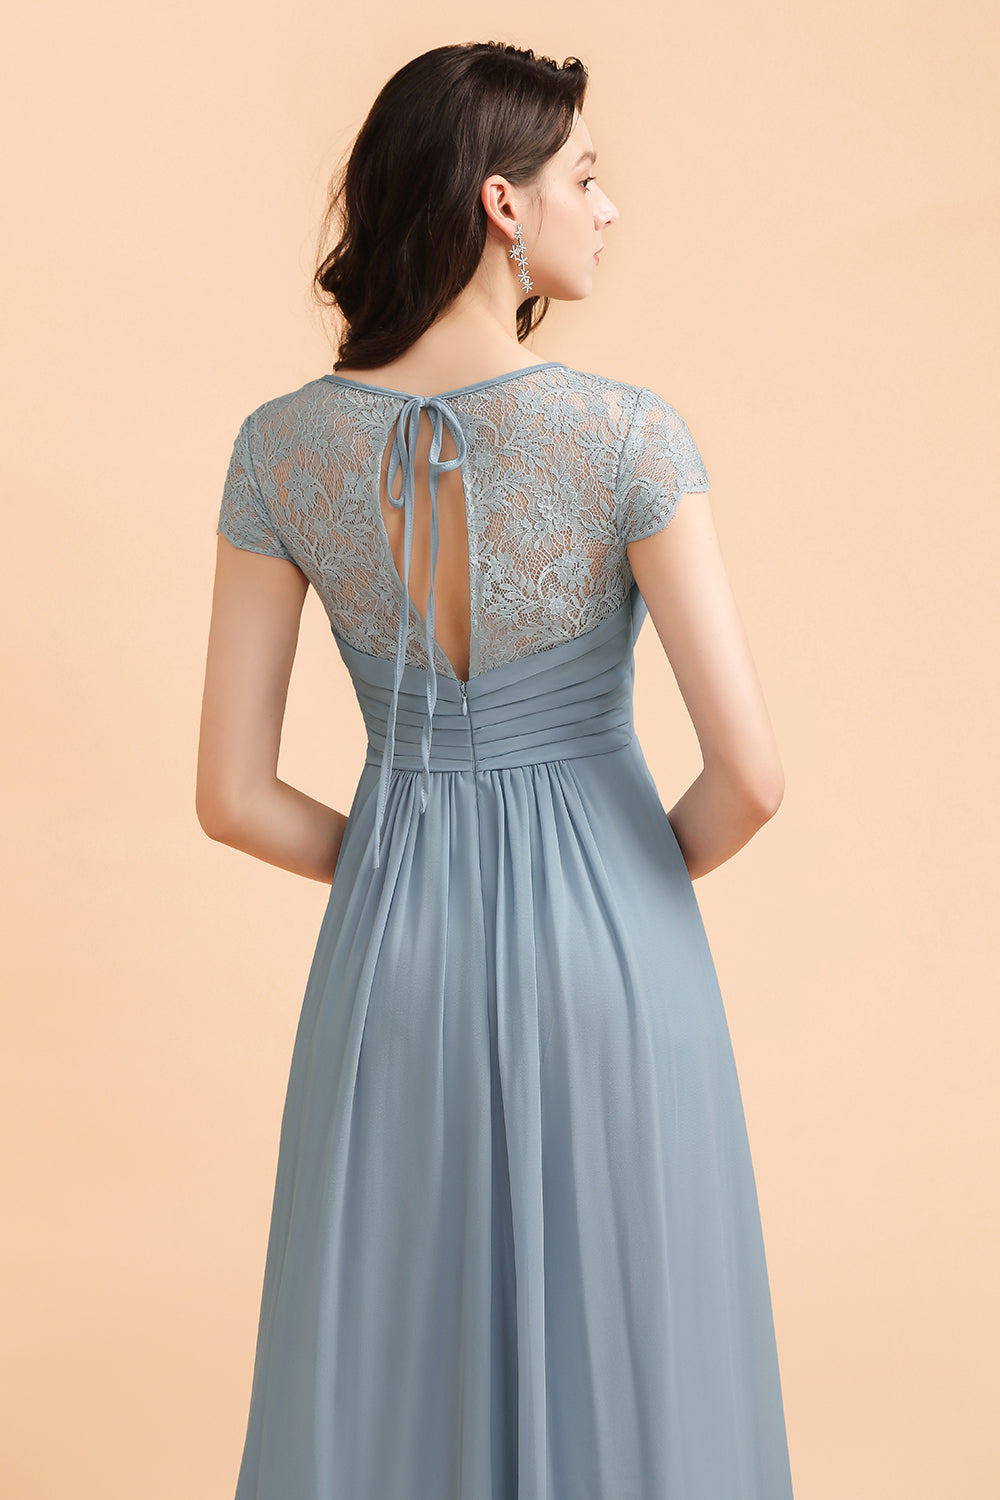 Chic Short Sleeves Lace Chiffon Bridesmaid Dress with Ruffles Online